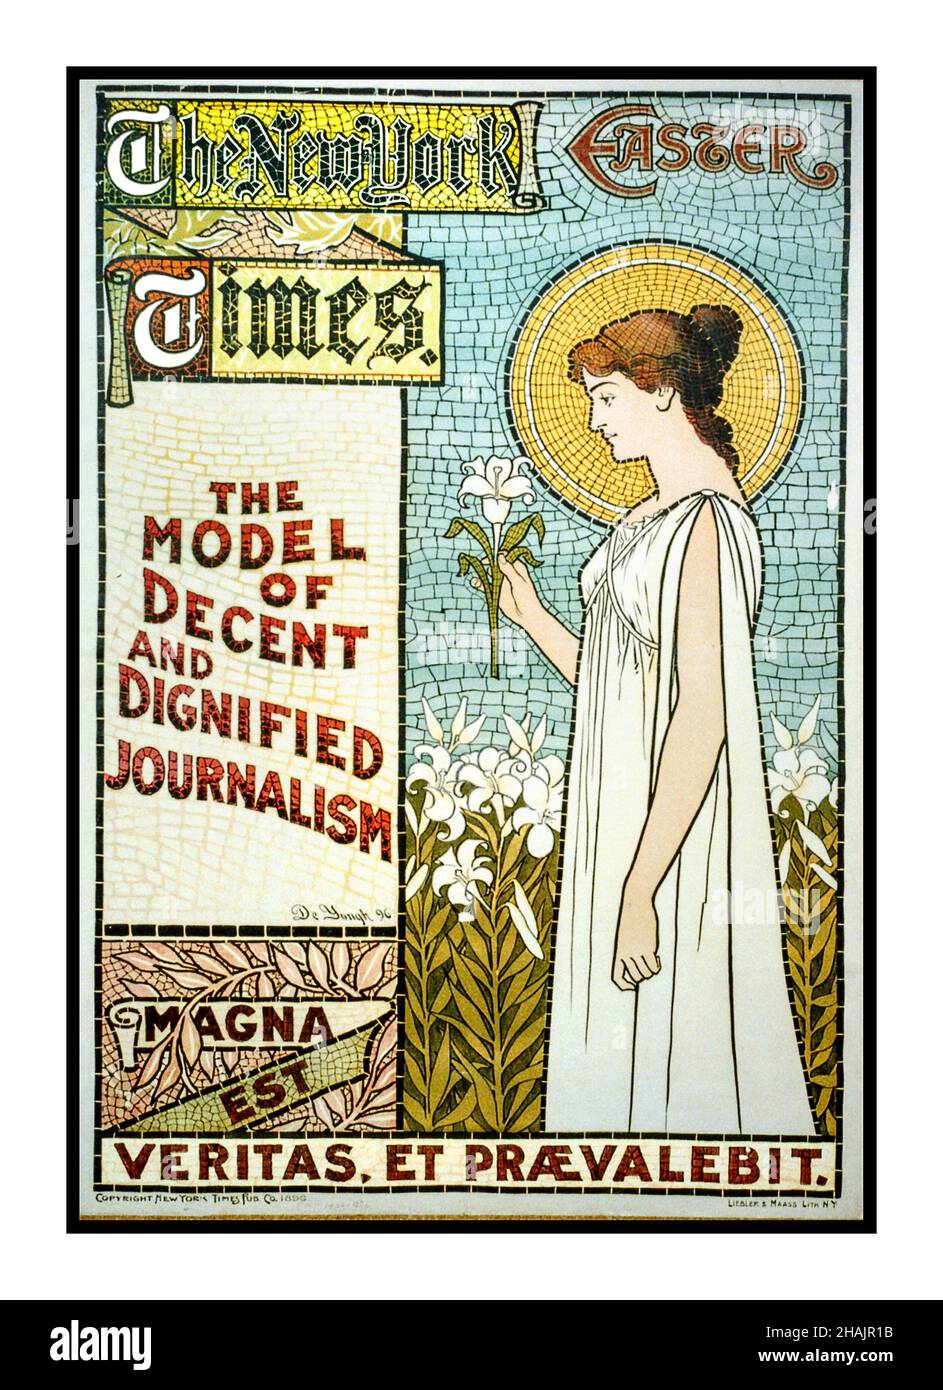 The New York Times 1890s Lithograph Illustration at. Easter. 'The model of decent and dignified journalism' / De Yongh. Woman holding lily. New York : Lieber & Maass Lith., 1896. Women--1890-1900 Newspapers--1890-1900  Easter--1890-1900 Lilies--1890-1900 Advertisements--1890-1900. Book & magazine posters--American--1890-1900. Lithographs--Color--1890-1900. Stock Photo